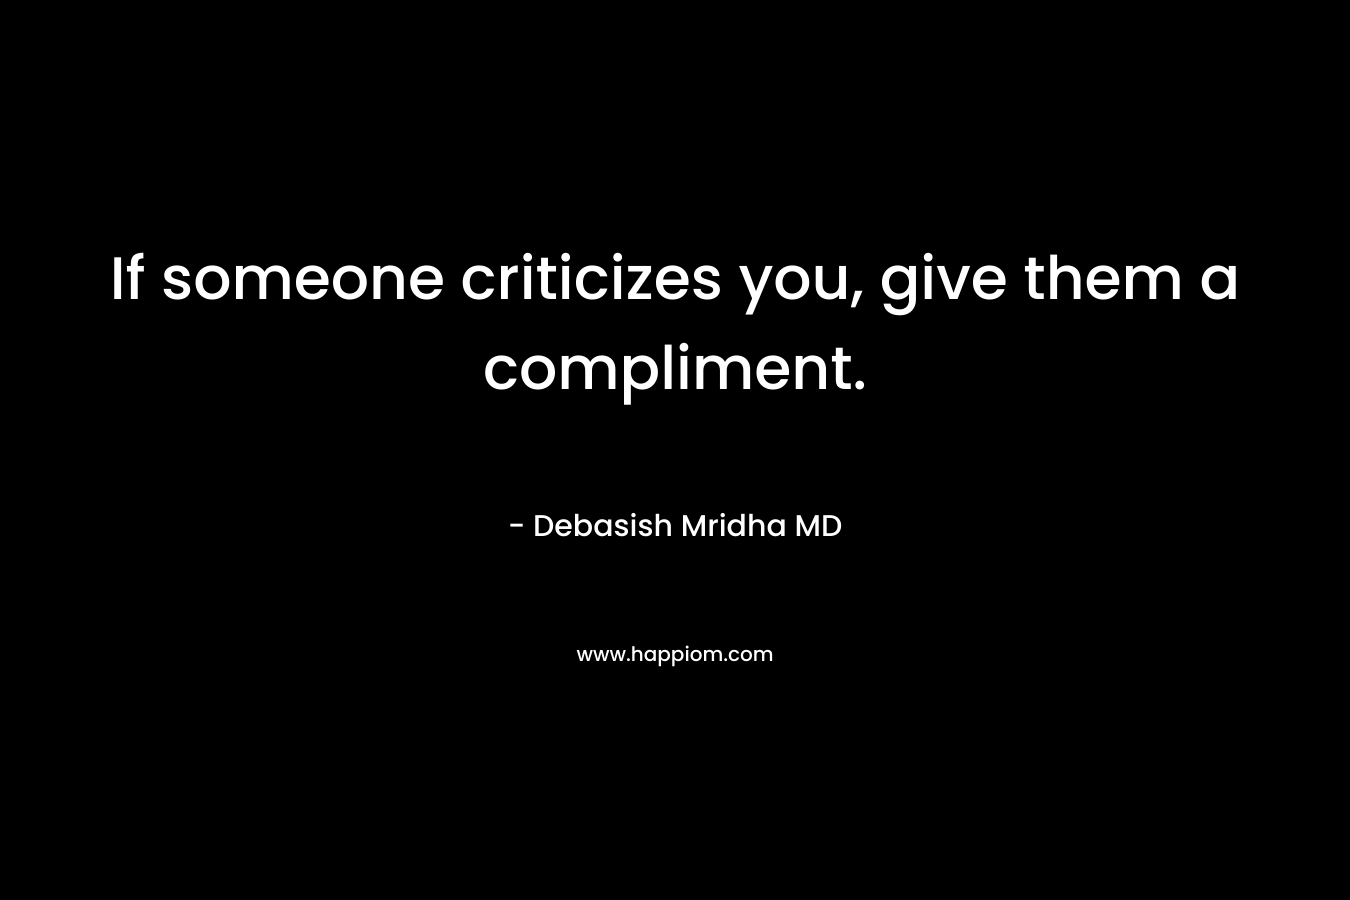 If someone criticizes you, give them a compliment.